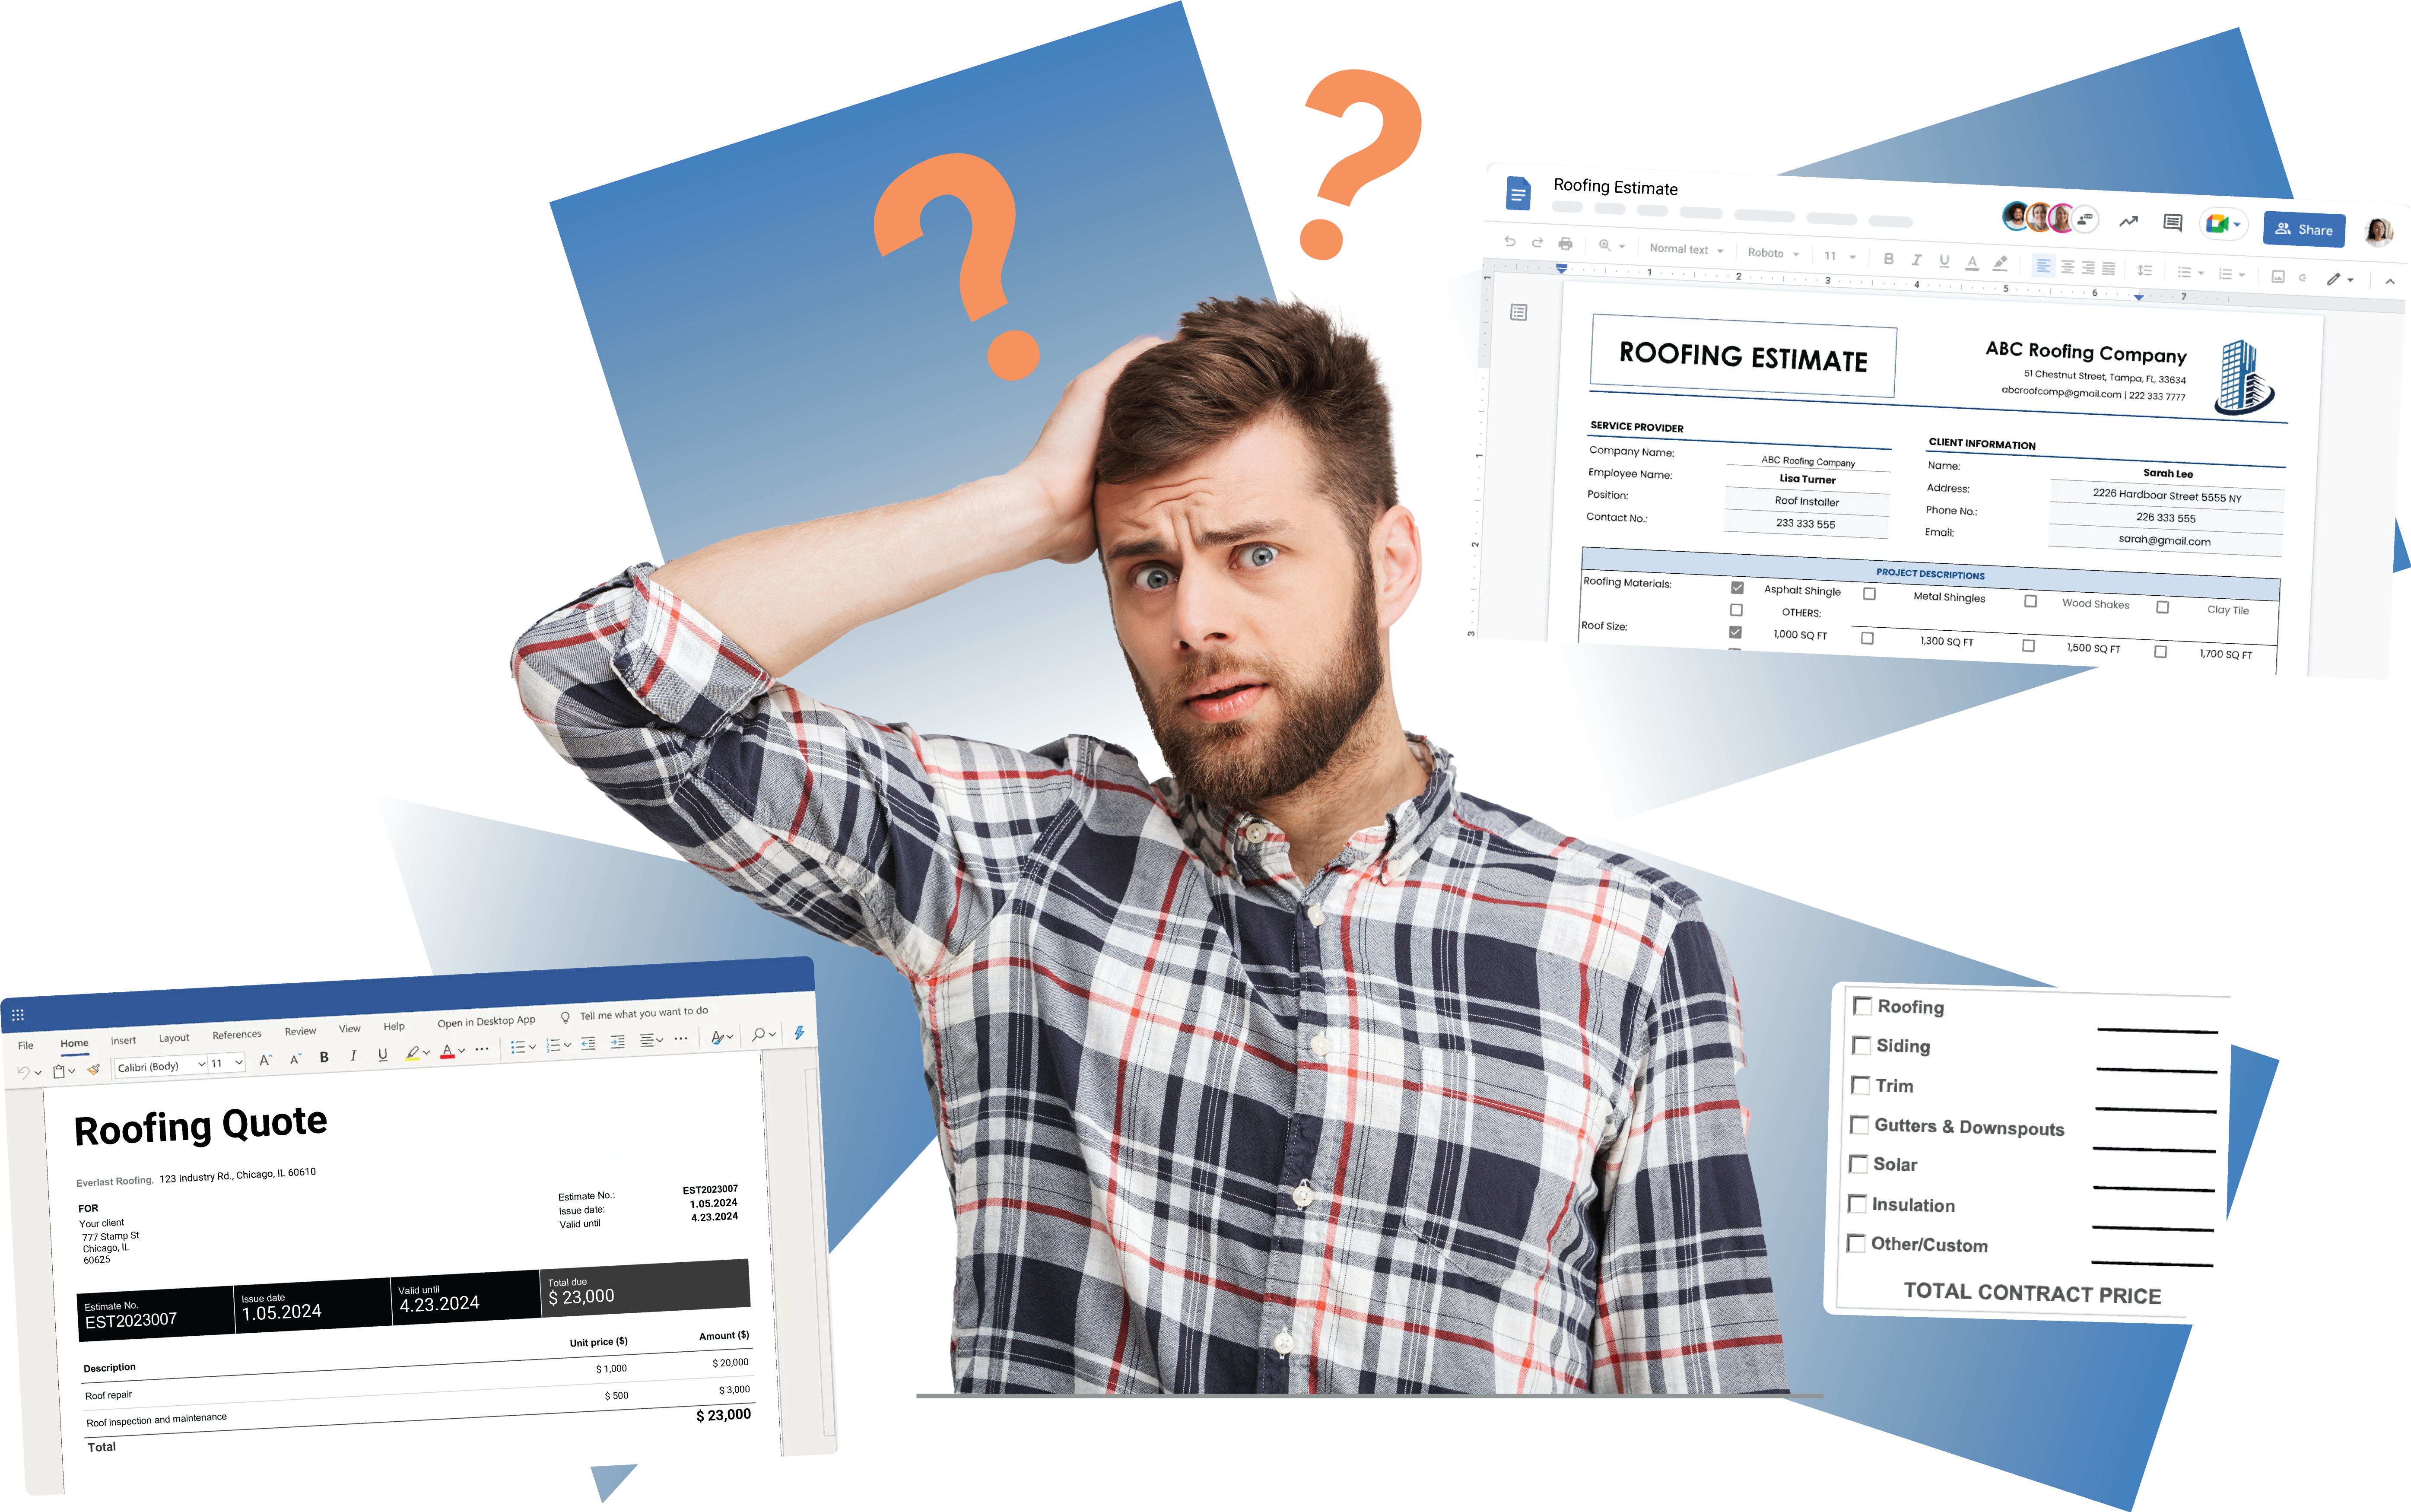 A man is confused, with various inferior roofing quote solutions surrounding him. Two question marks are above his head, as he is seeking the best solution for the job.